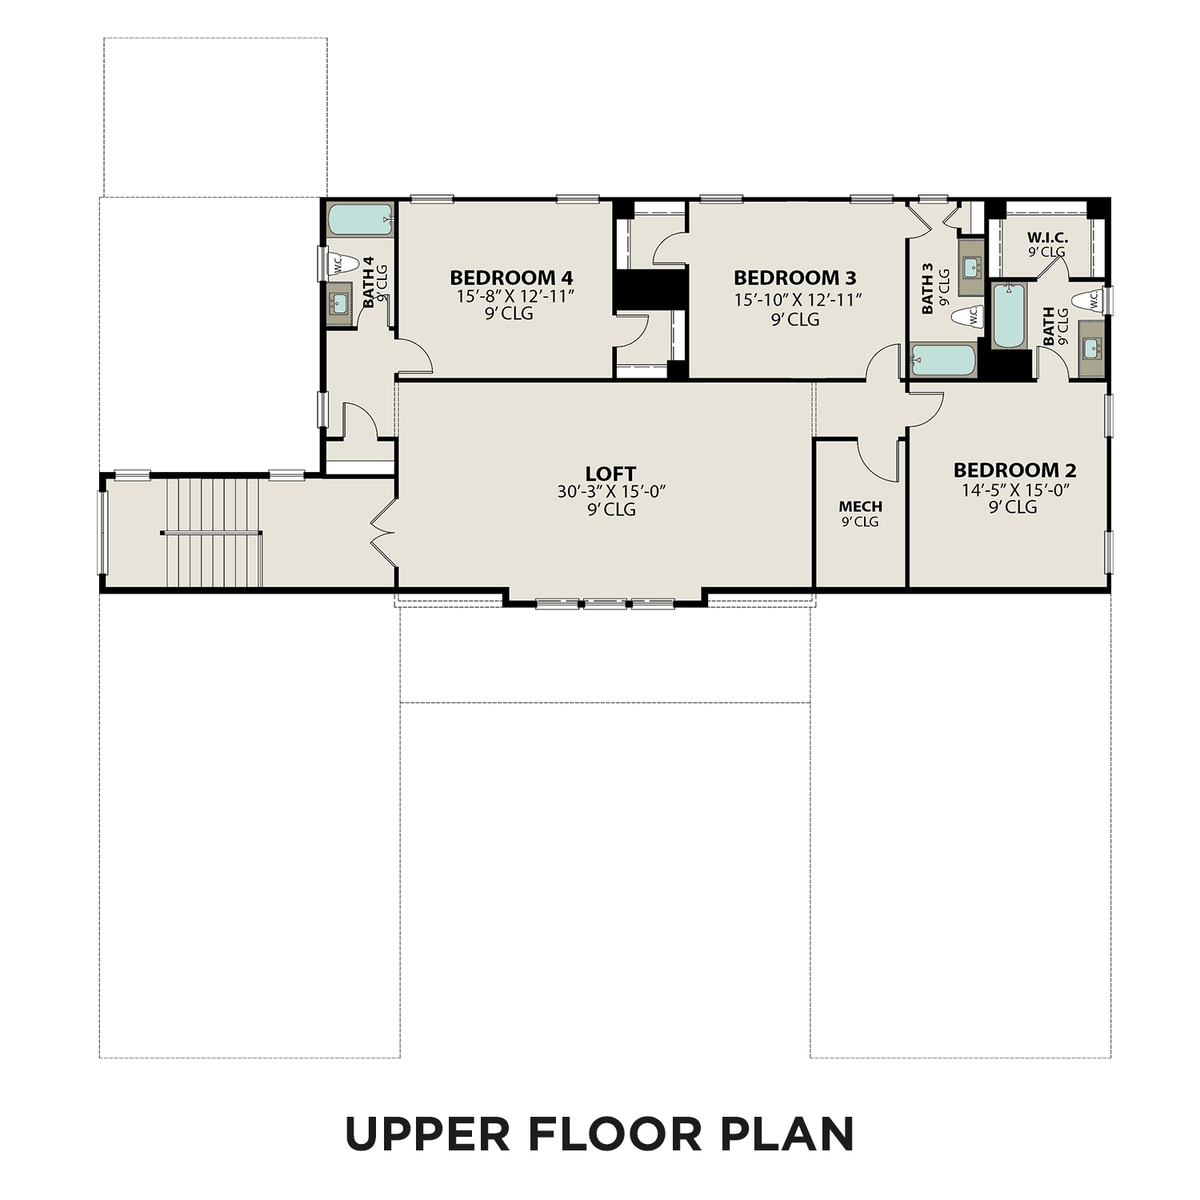 2 - The Cheatham A buildable floor plan layout in Davidson Homes' Shelton Square community.